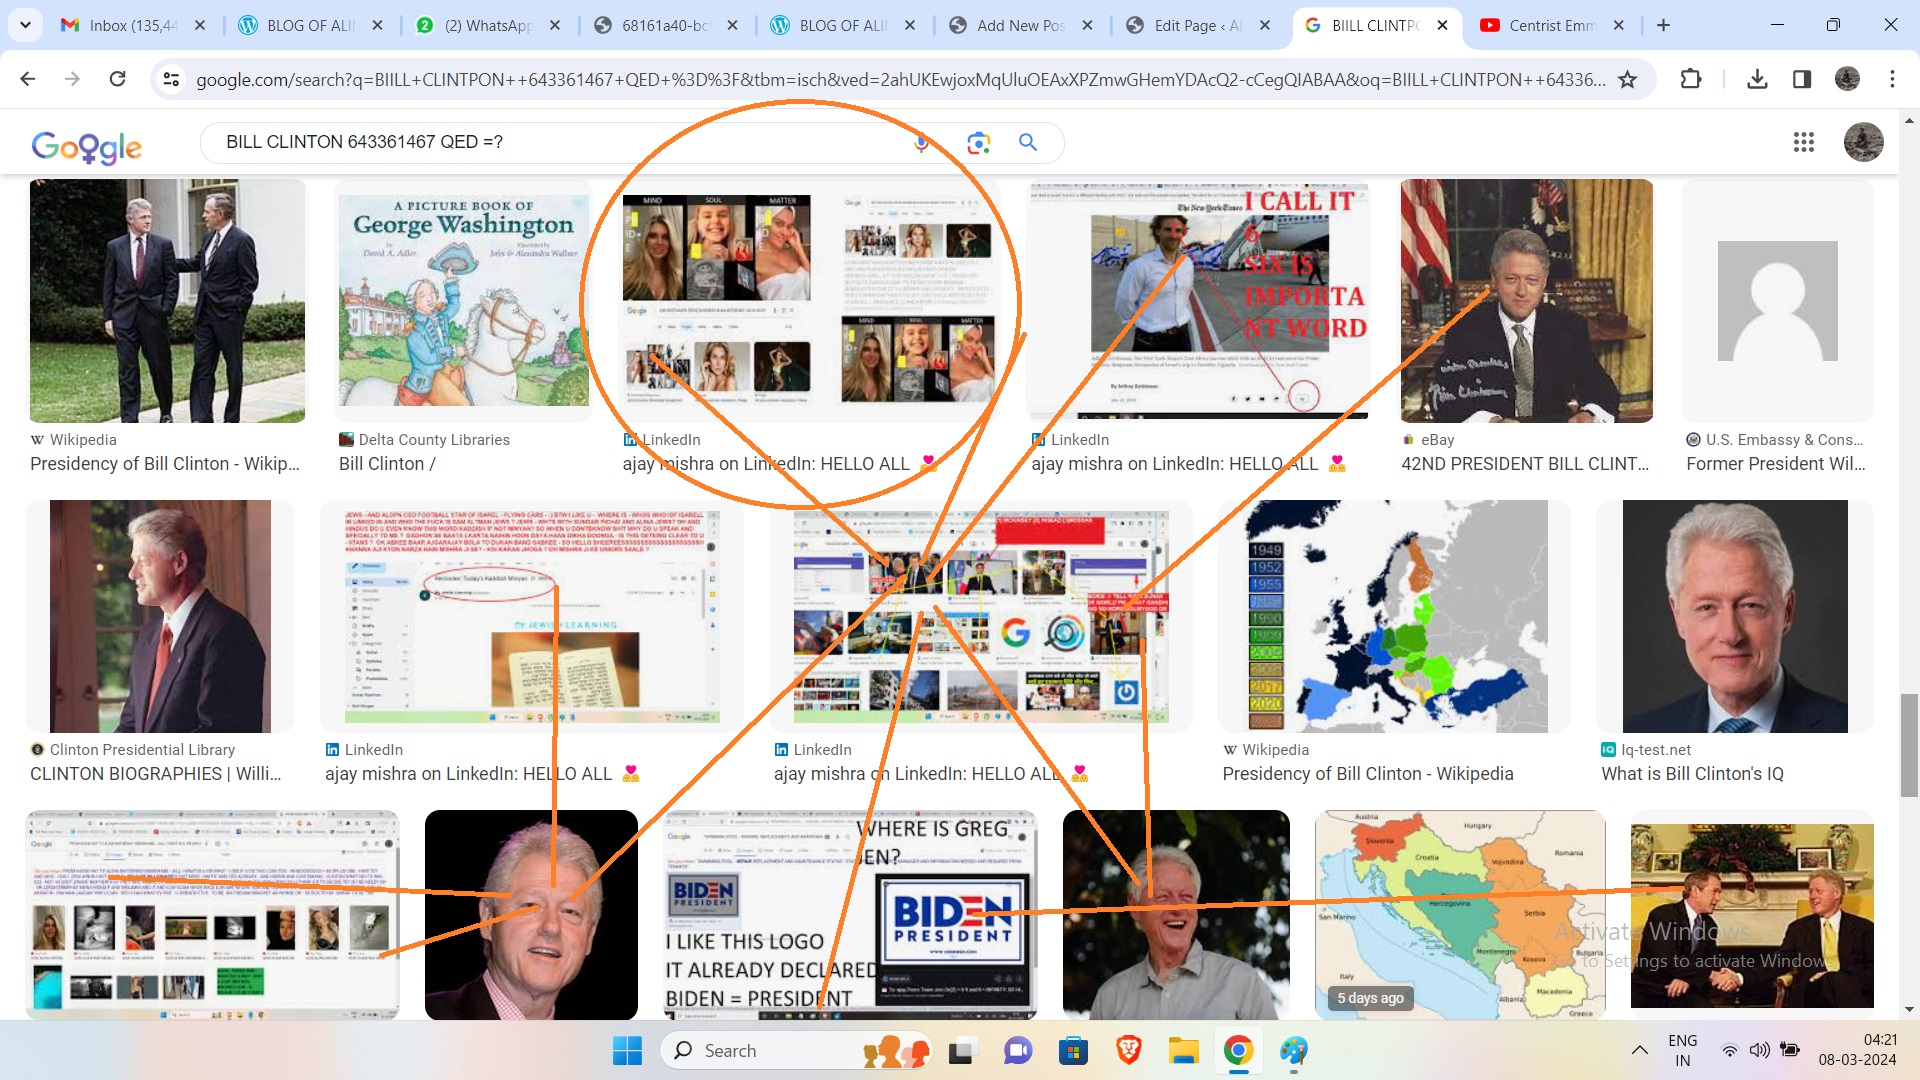 BILL CLINTON 643361467 QED EQUAL TOP === WOW AJAY IS IN LUCKNOW ND ALINA MATSSENKO IS OPH WHERE IS MACRON AN BORIS JOHNSON